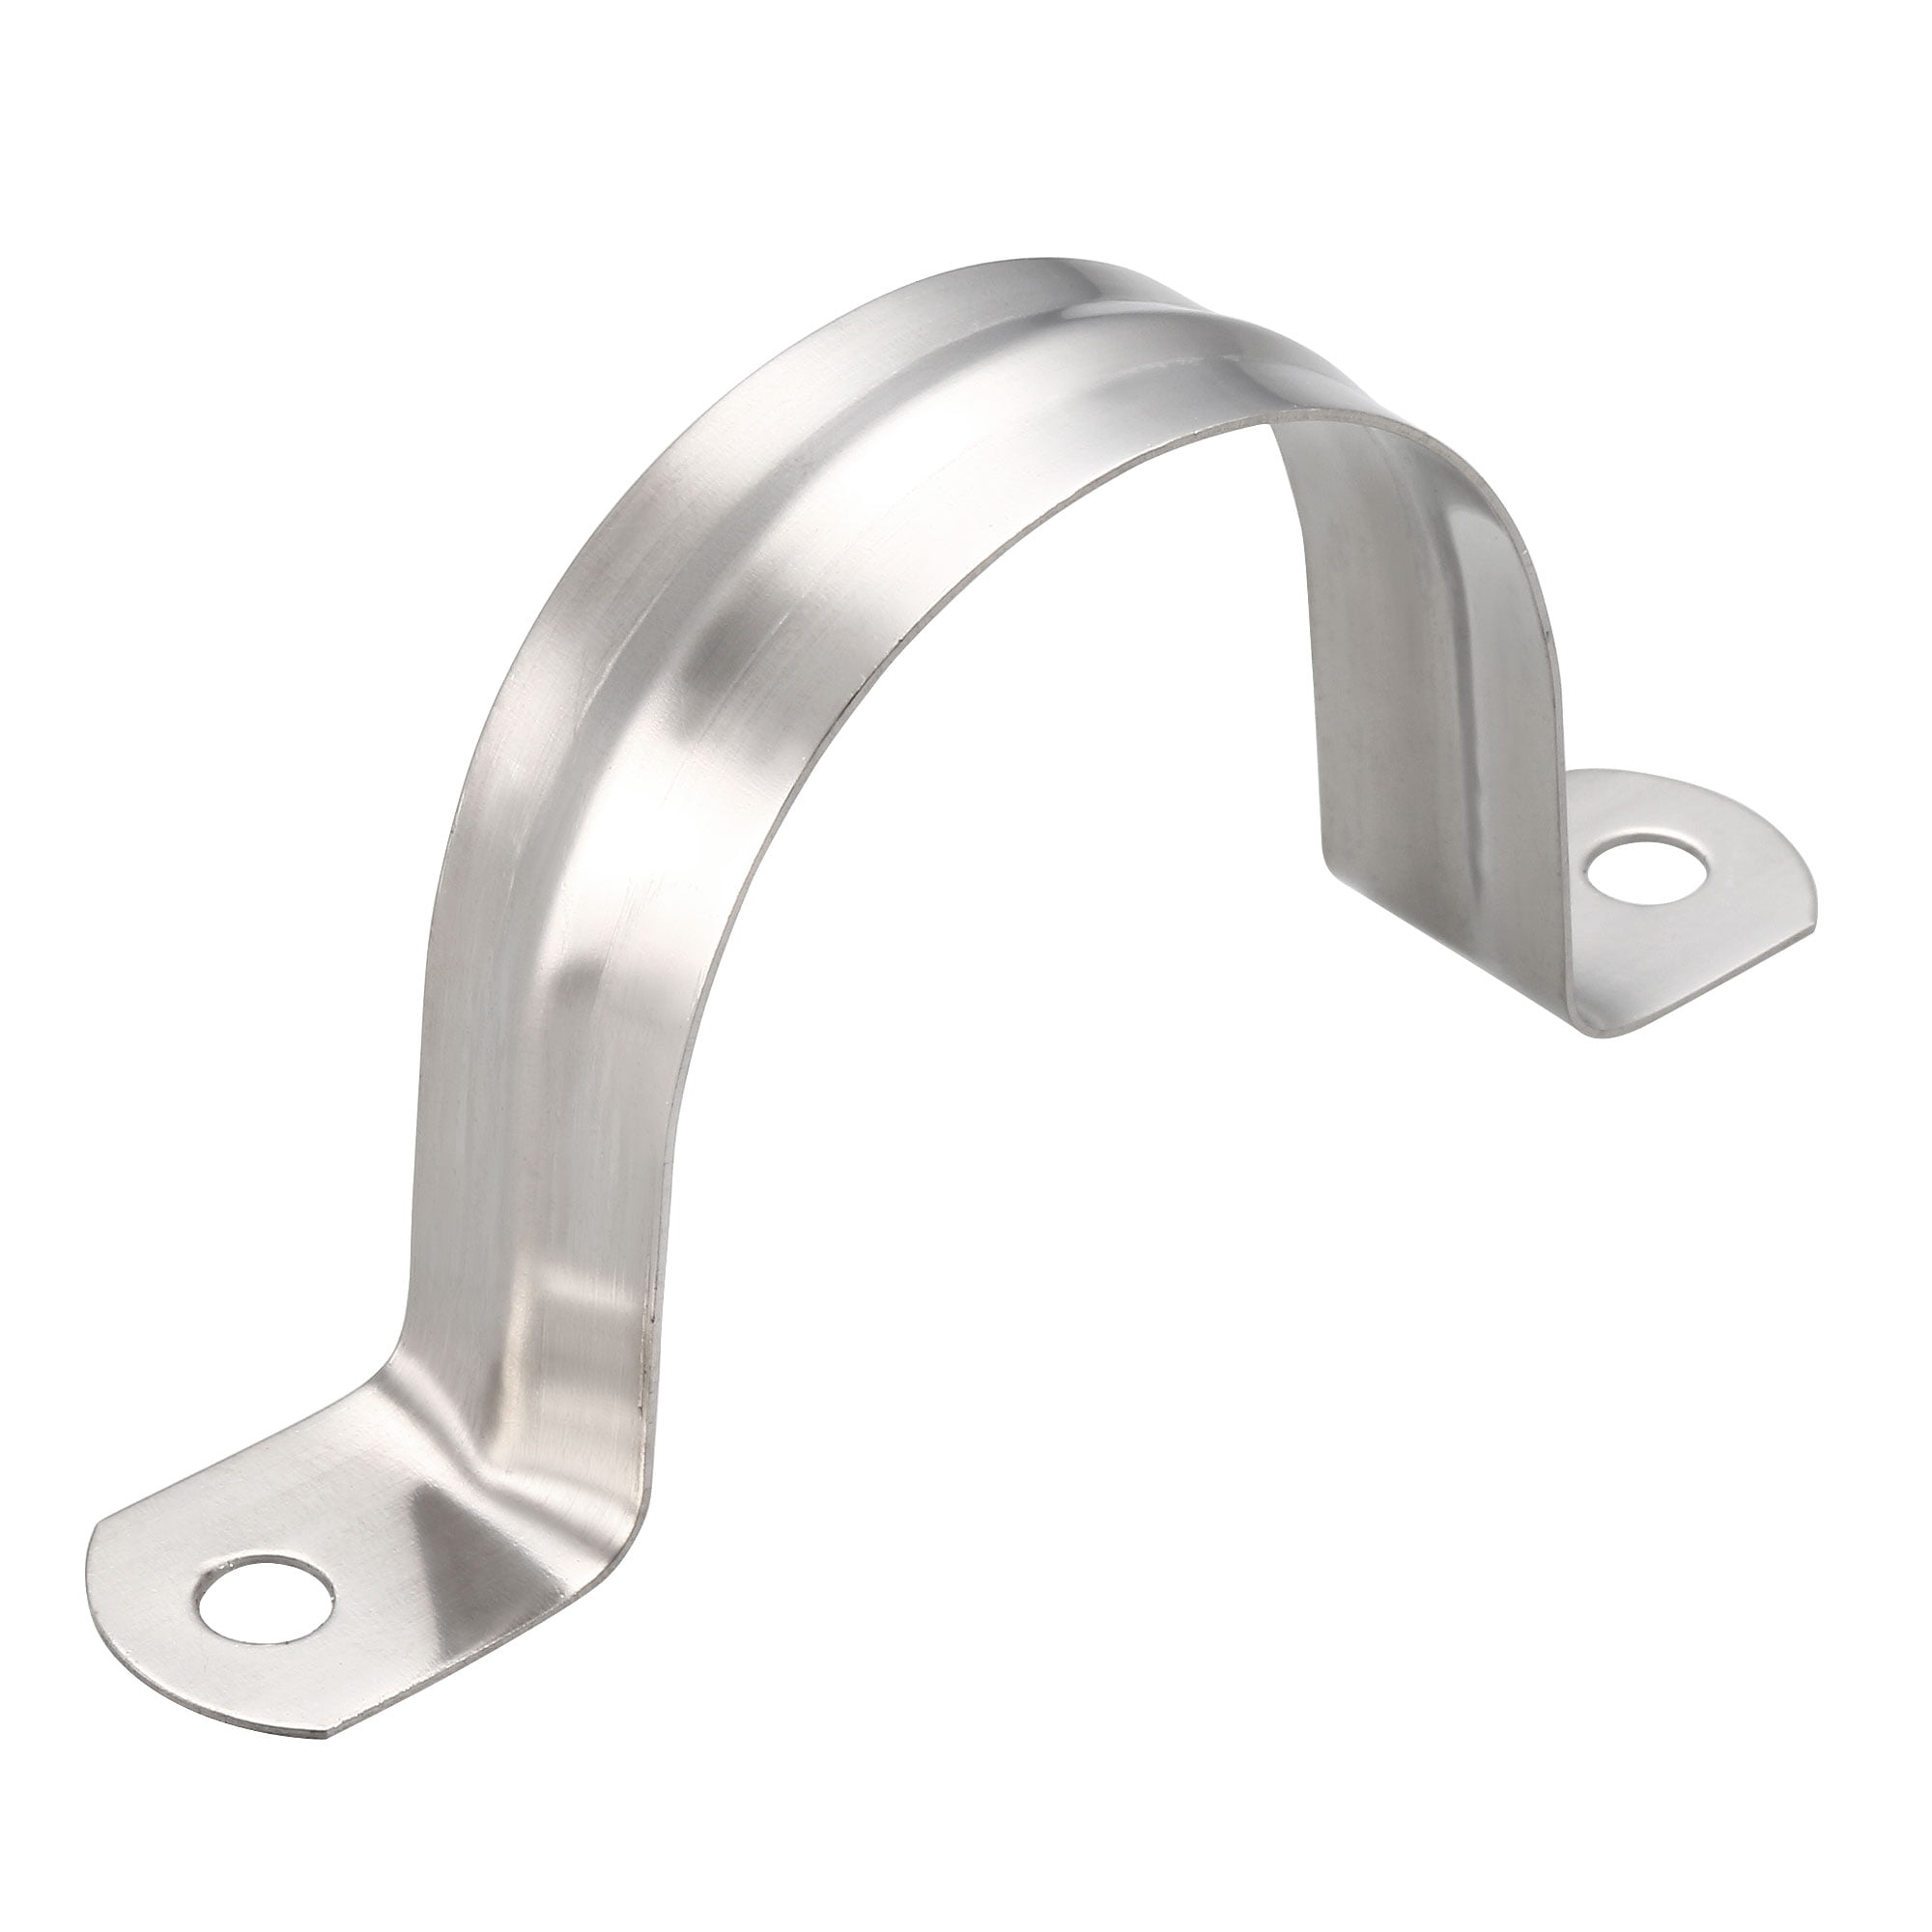 50mm Rigid Pipe Strap, 304 Stainless Steel, 2 Hole Clamps, 4 Pcs Stainless Steel Strapping With Holes